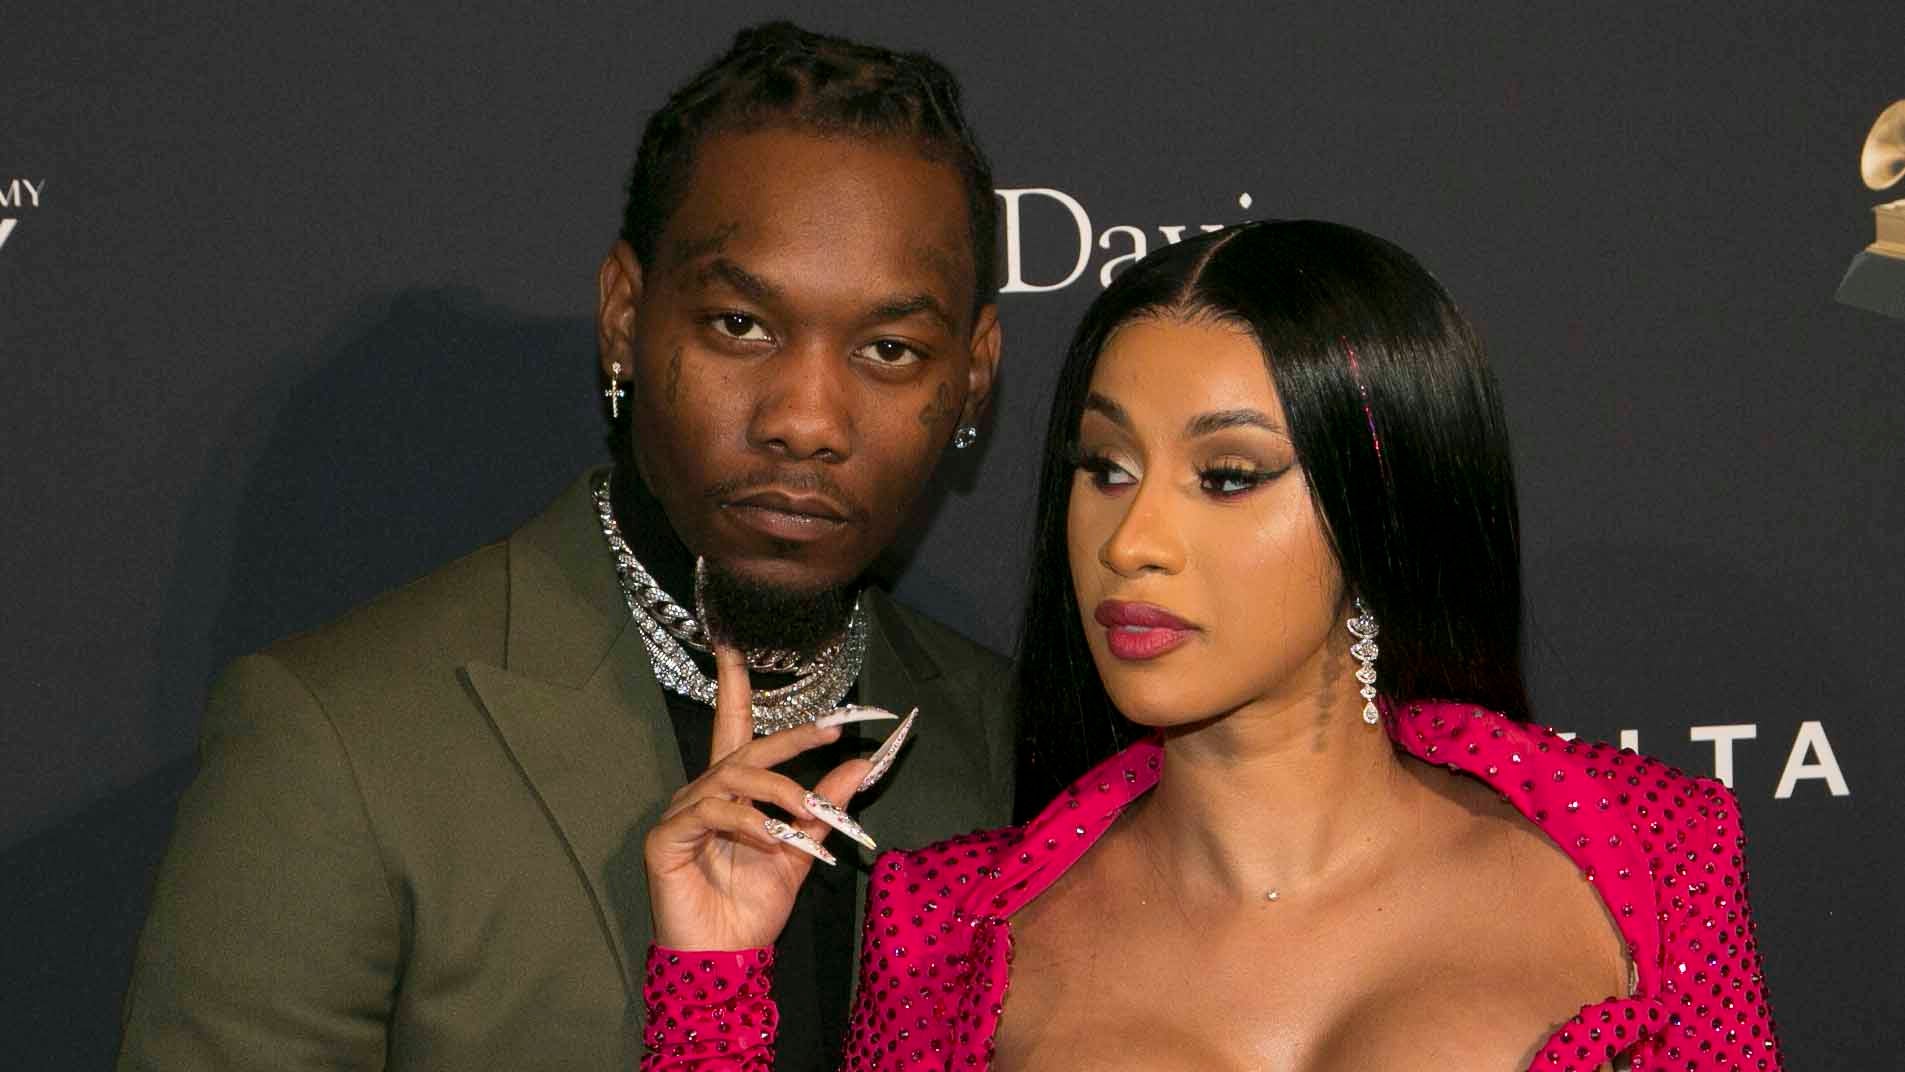 Cardi B Shuts Down the Grammys Red Carpet With Offset at Her Side